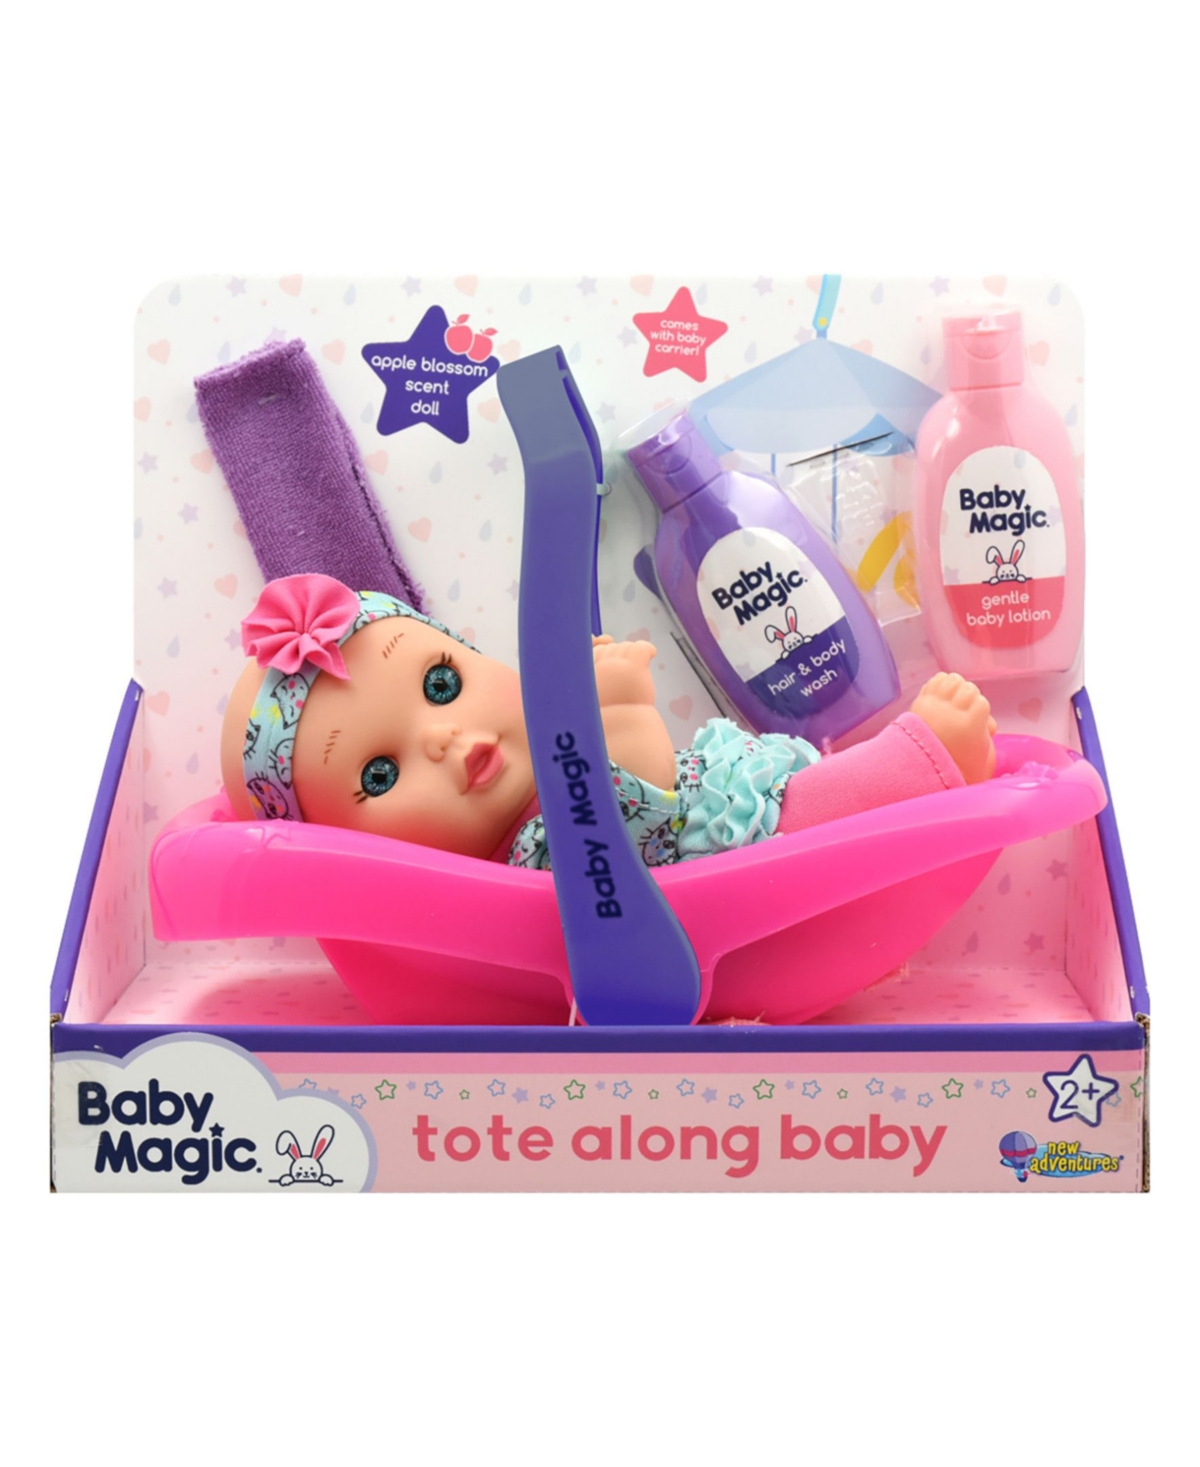 Redbox Baby Magic Tote Along Baby Bath Set With Toy Baby Doll Scented In Multi